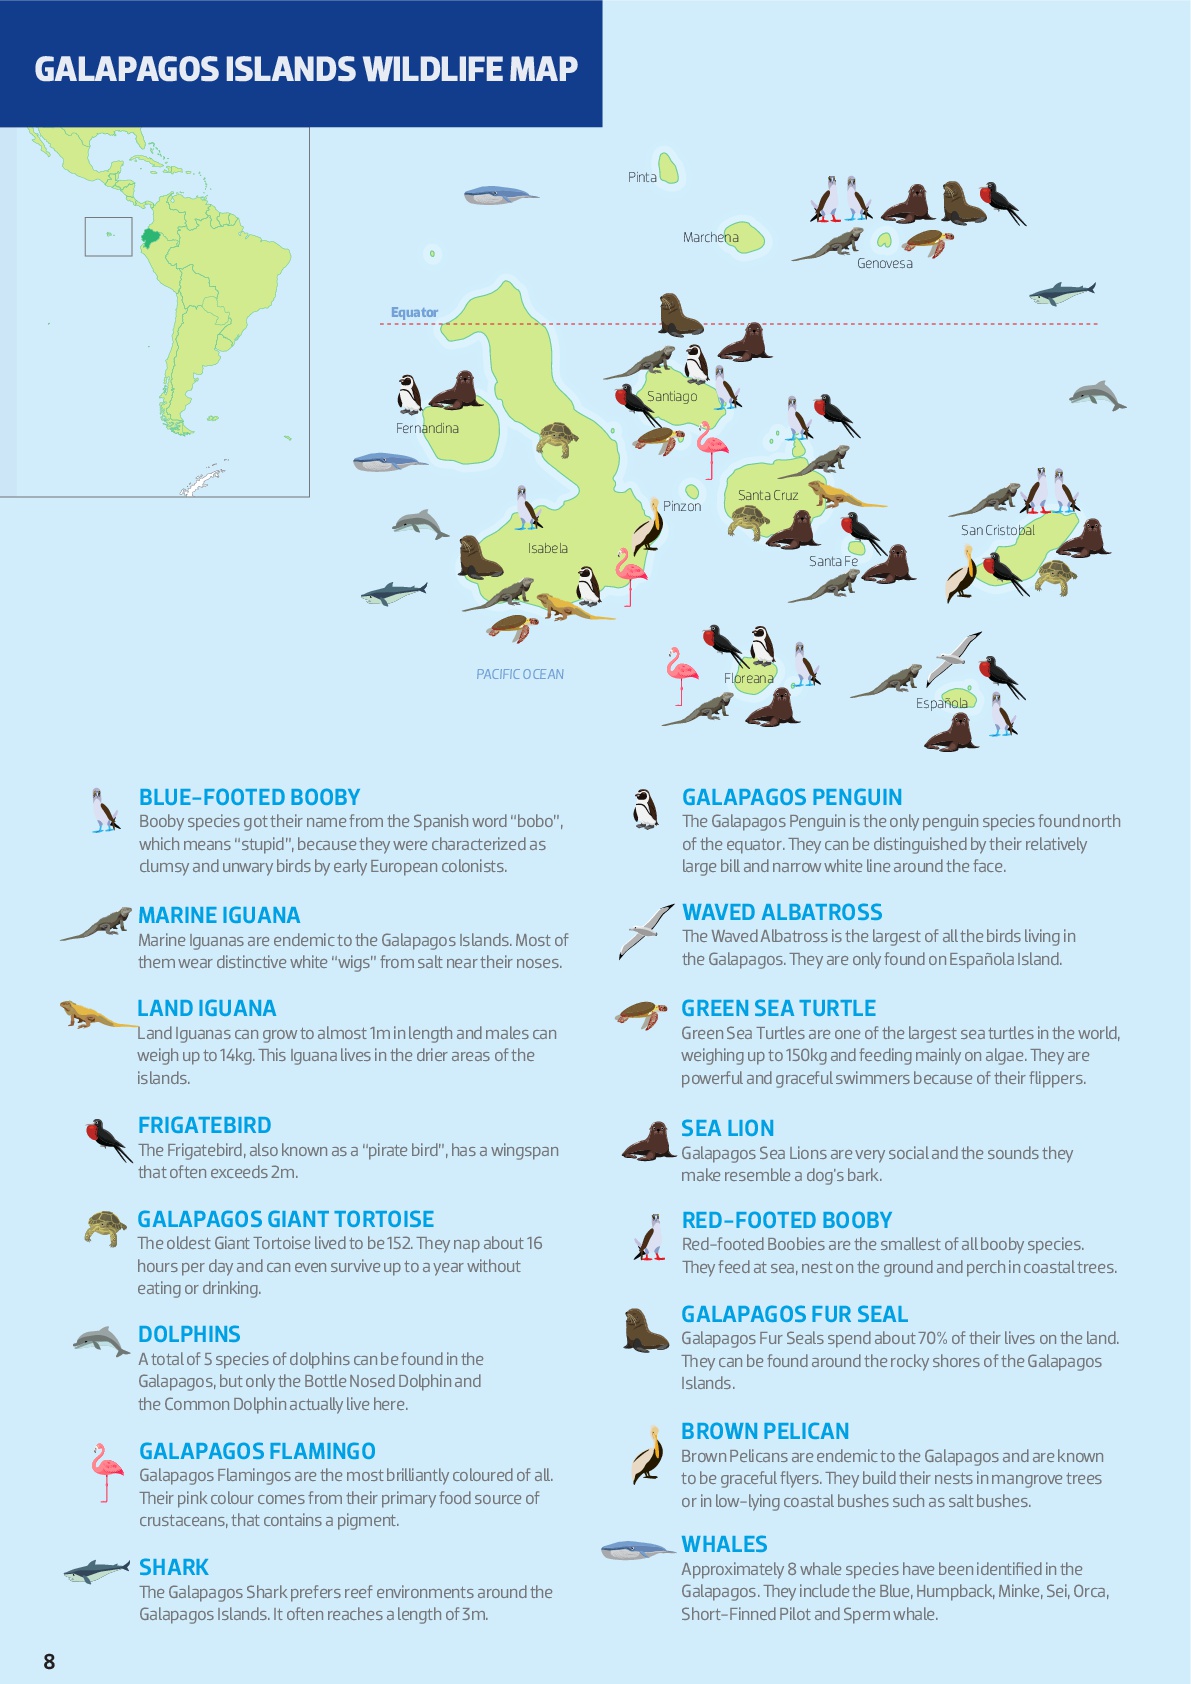 Where to find the wildlife in the Galapagos Islands